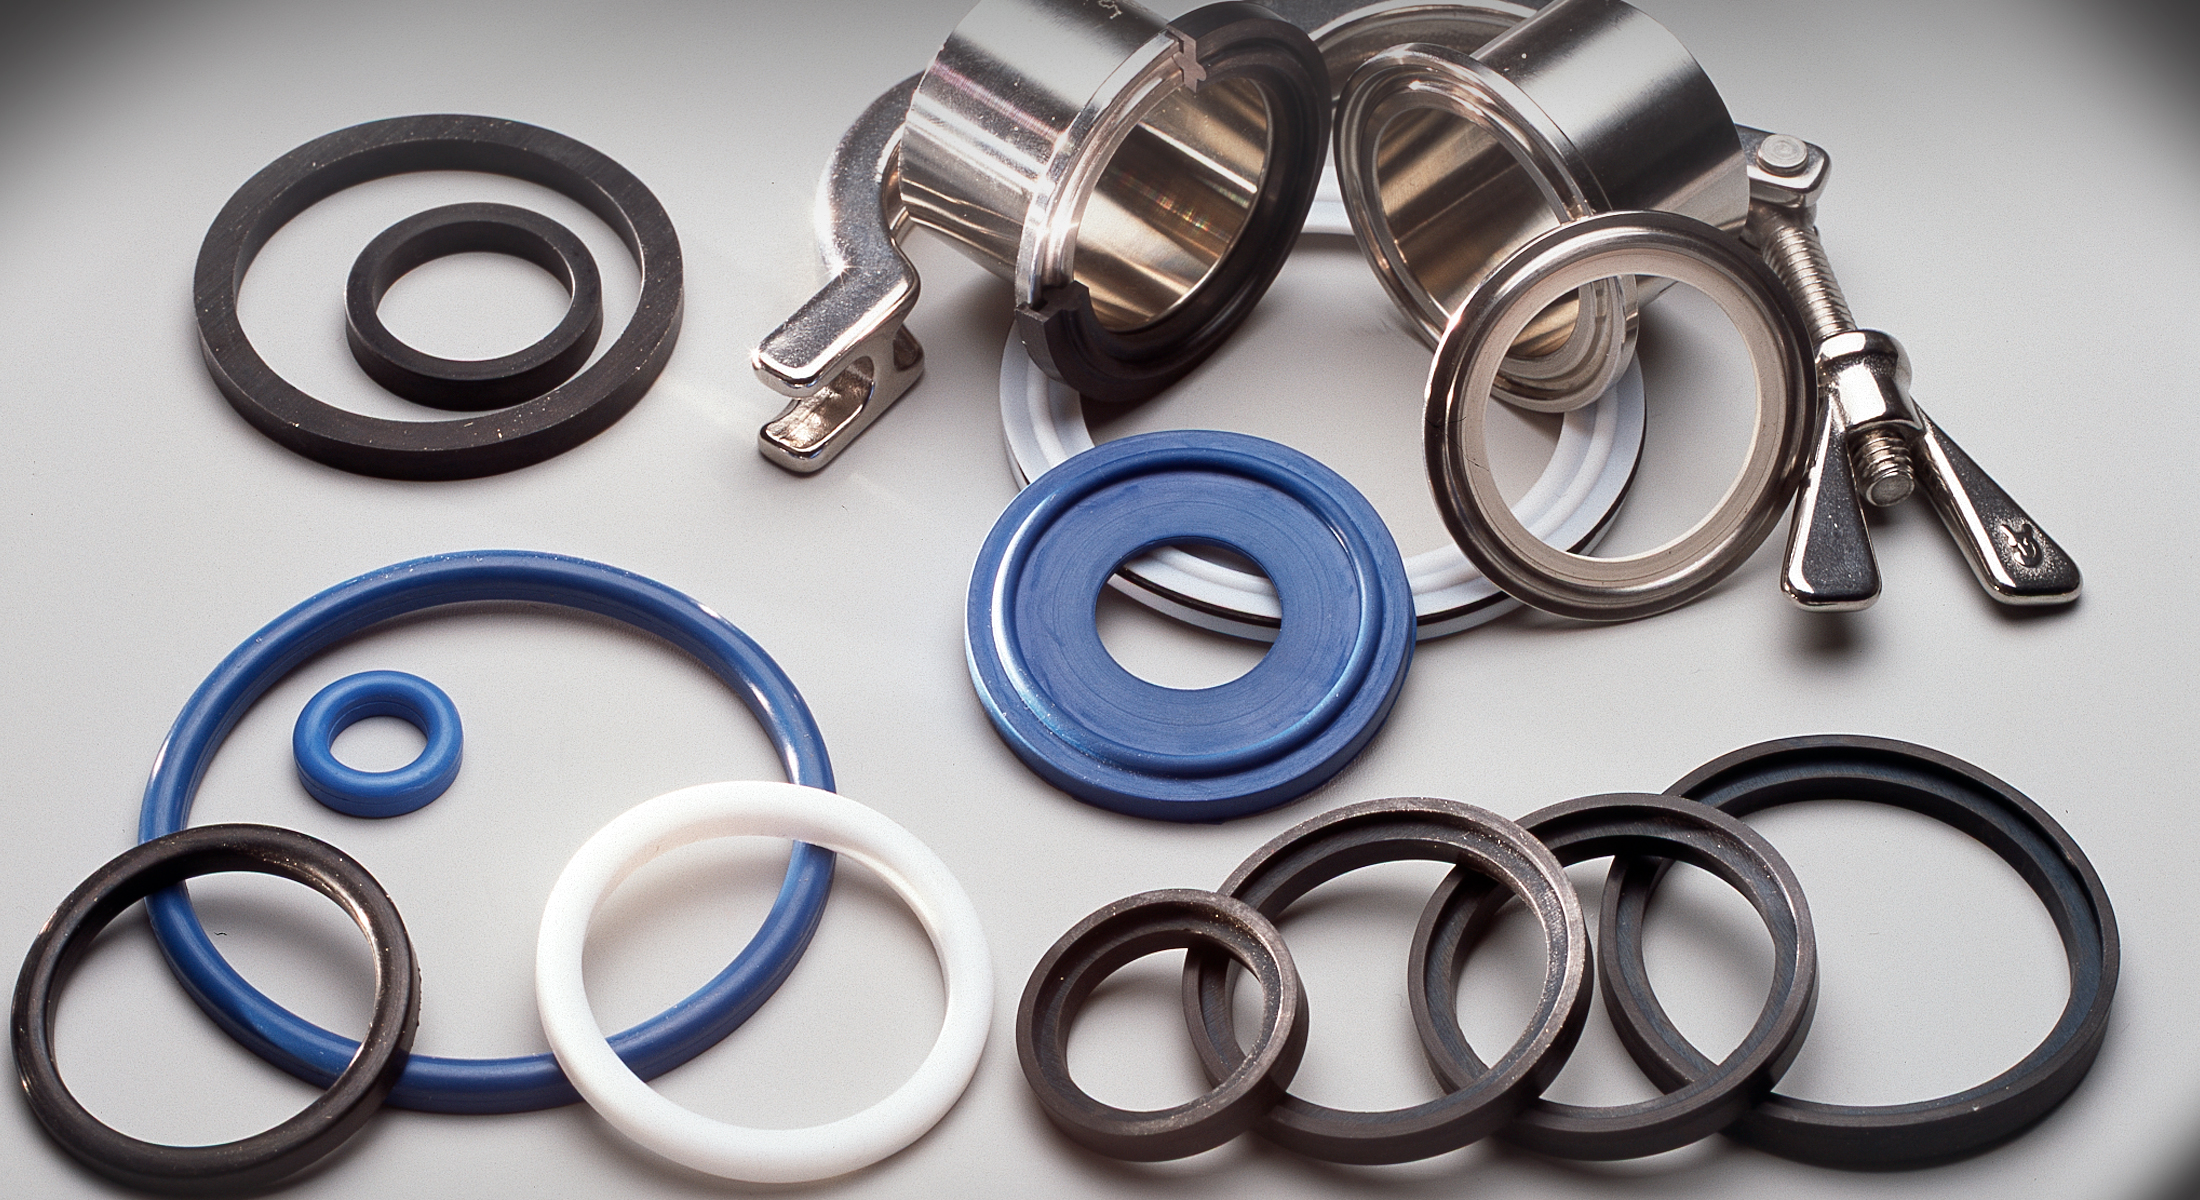 Manufacturers of Rubber Gaskets | Over 30 Years Experience